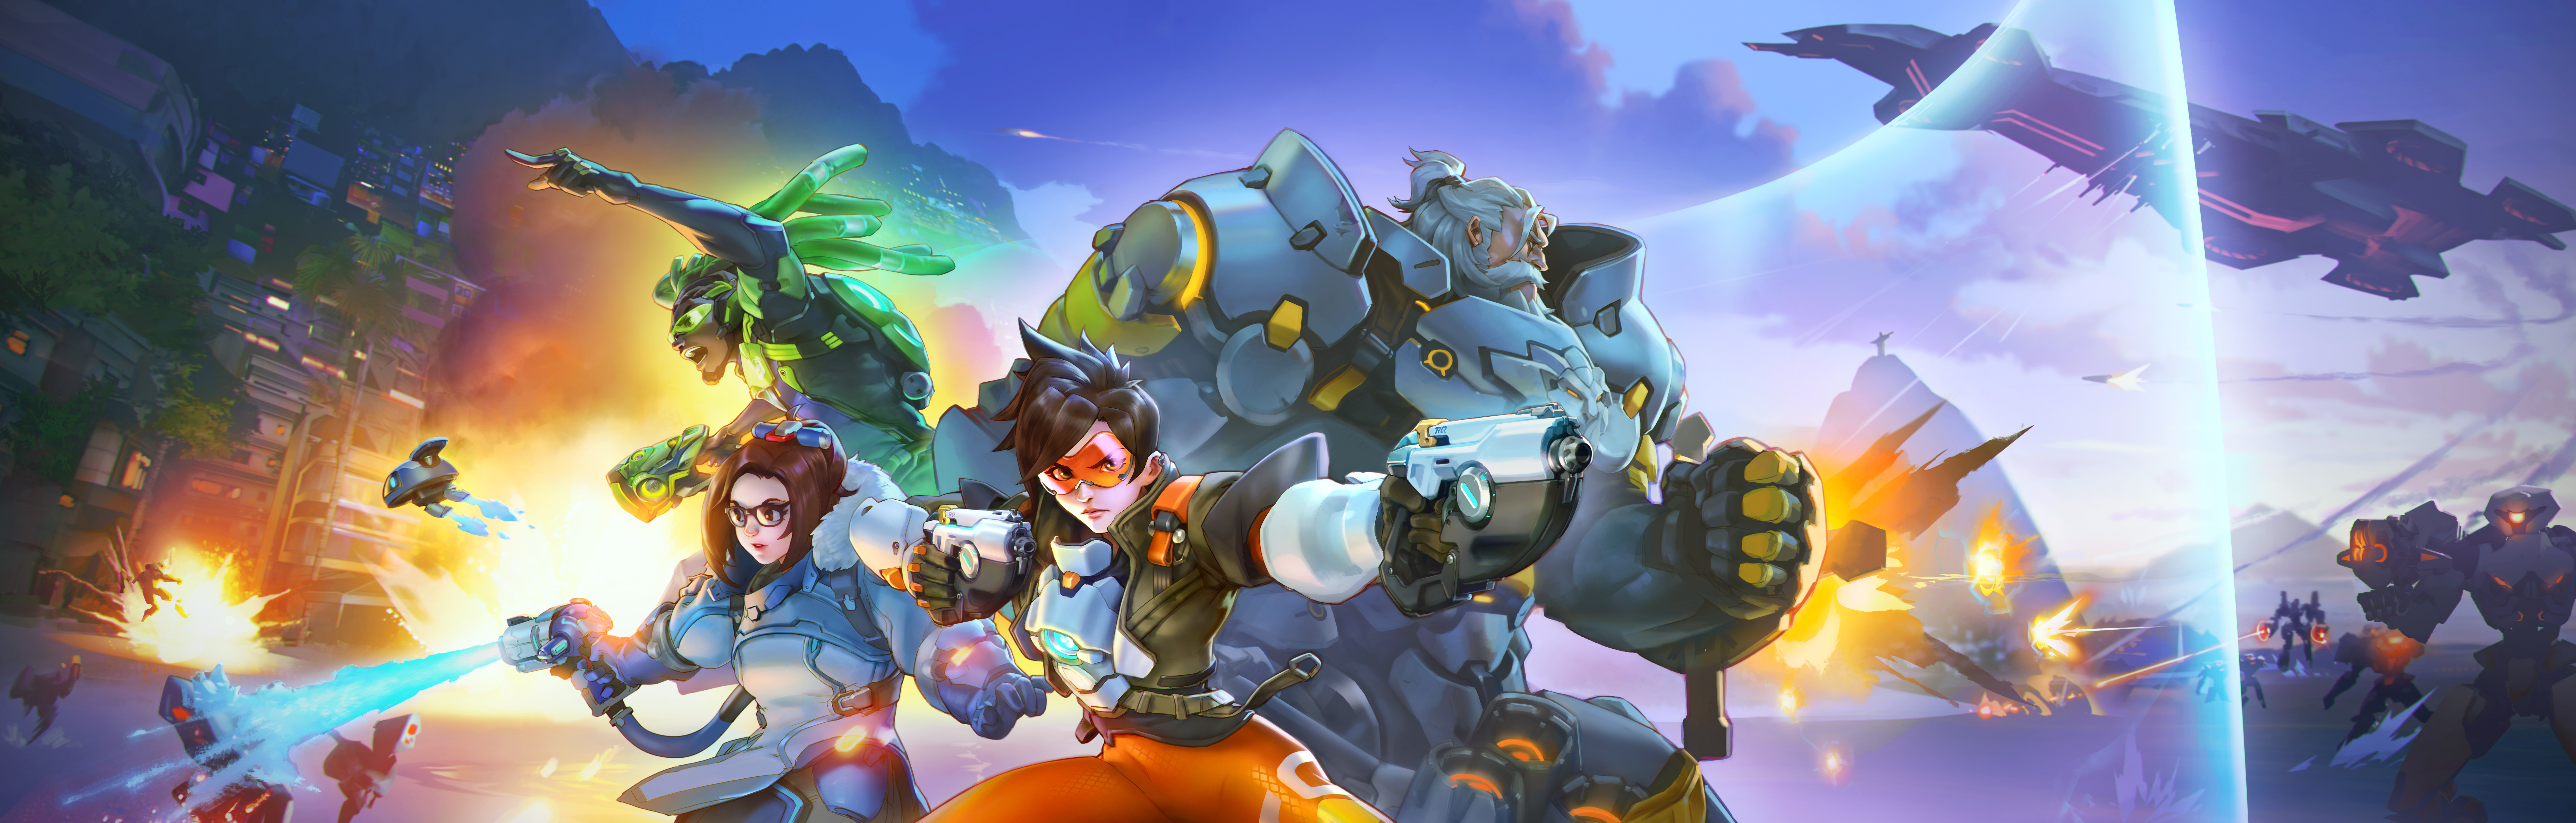 General 14830x4740 video games Overwatch Tracer (Overwatch) Reinhardt (Overwatch) Mei (Overwatch) Lúcio (Overwatch) Blizzard Entertainment PC gaming